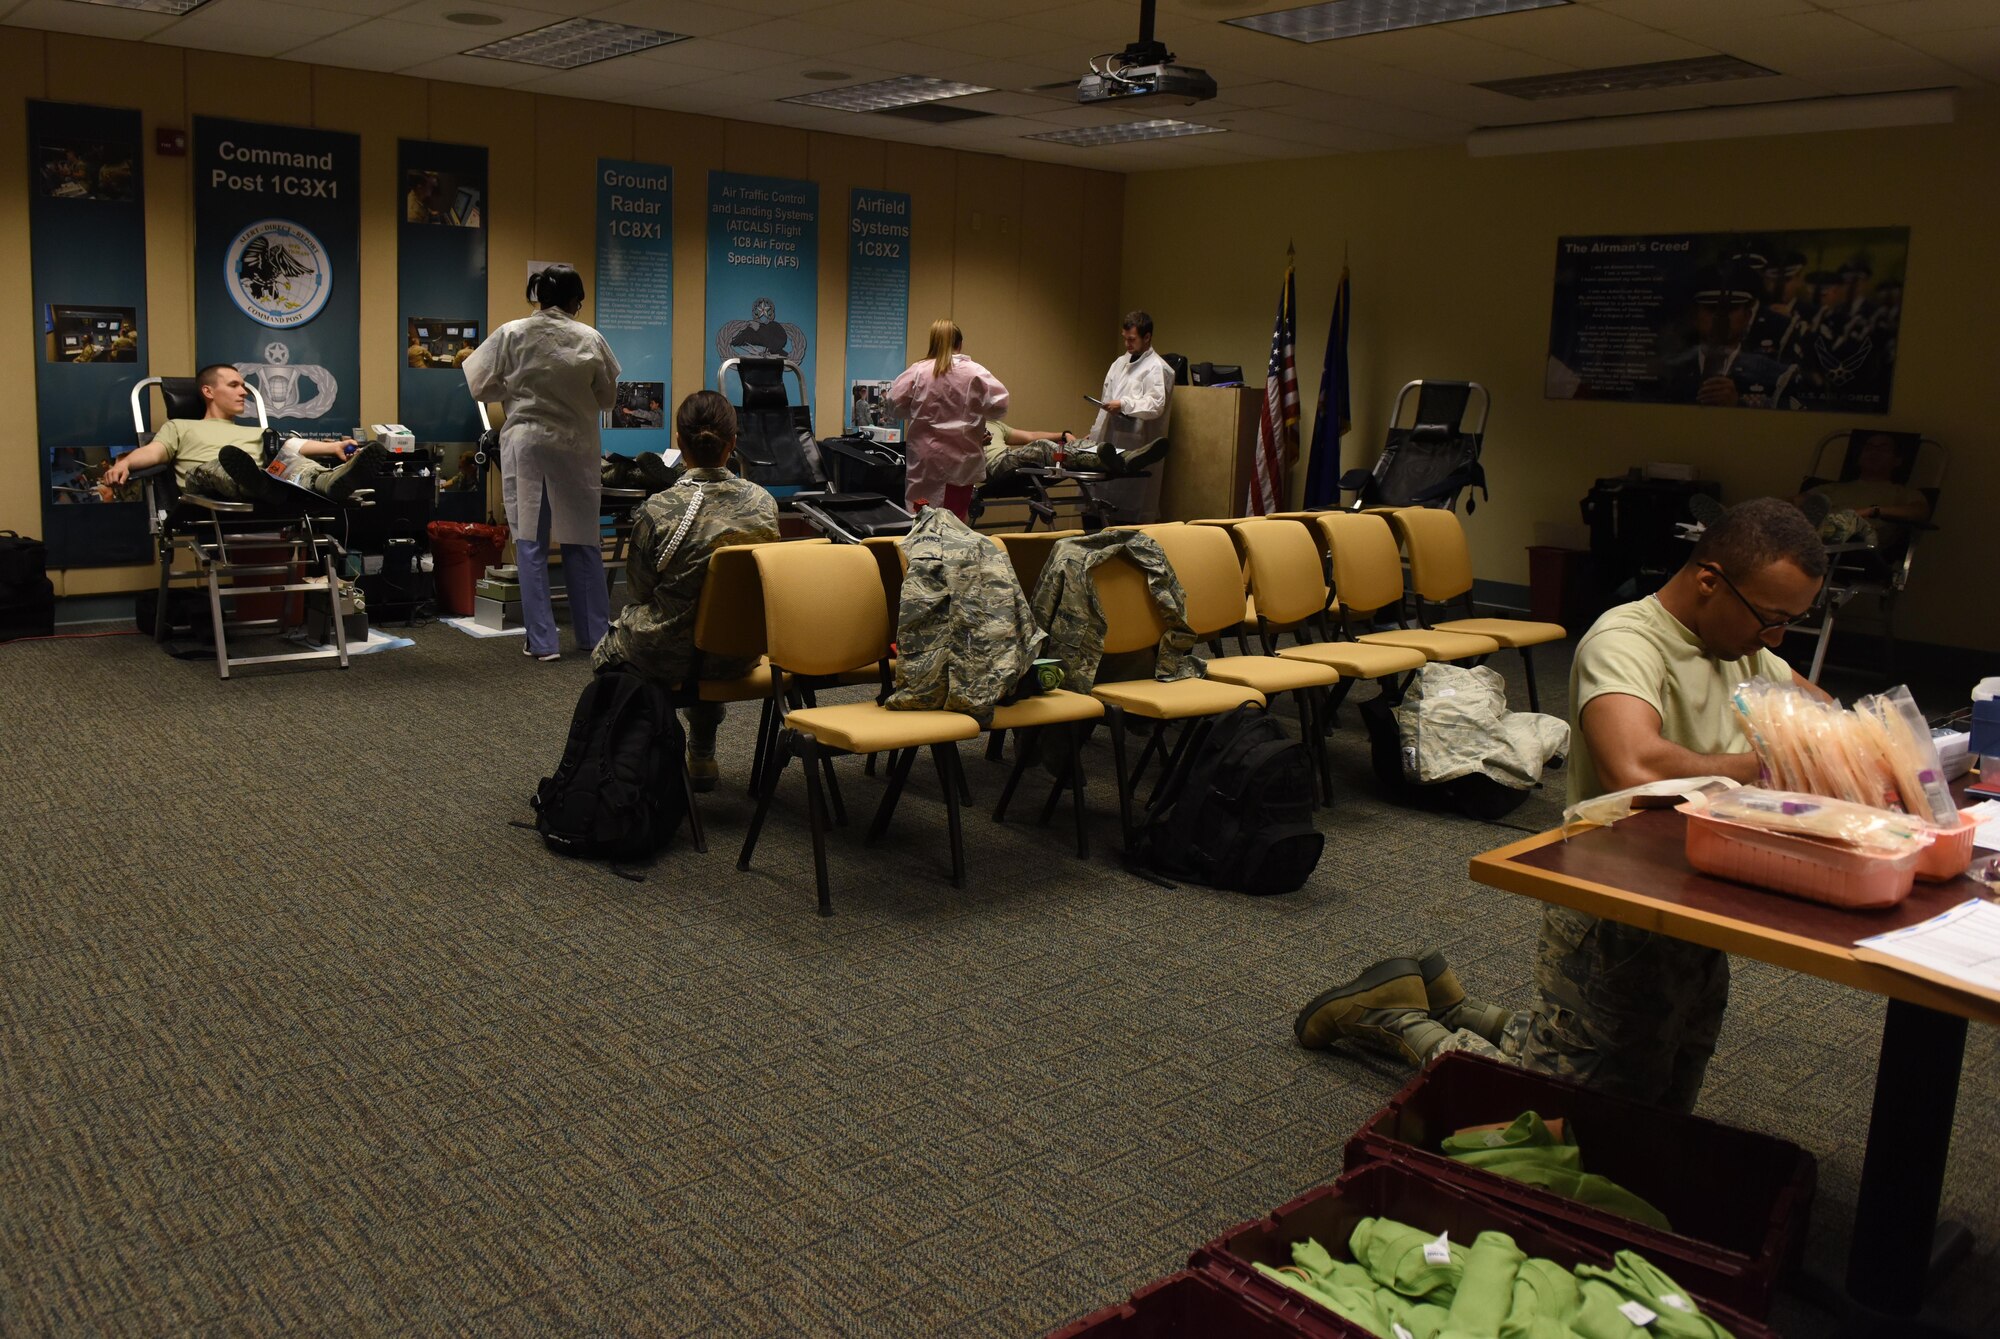 Members of Team Keesler participate in a blood drive at Cody Hall Nov. 21, 2016, on Keesler Air Force Base, Miss. The Keesler Blood Donor Center is one of three Air Force blood donor centers and supports the Armed Services Blood Program by collecting blood for the Defense Department for use in deployed locations and military treatment facilities. (U.S. Air Force photo by Senior Airman Holly Mansfield)  